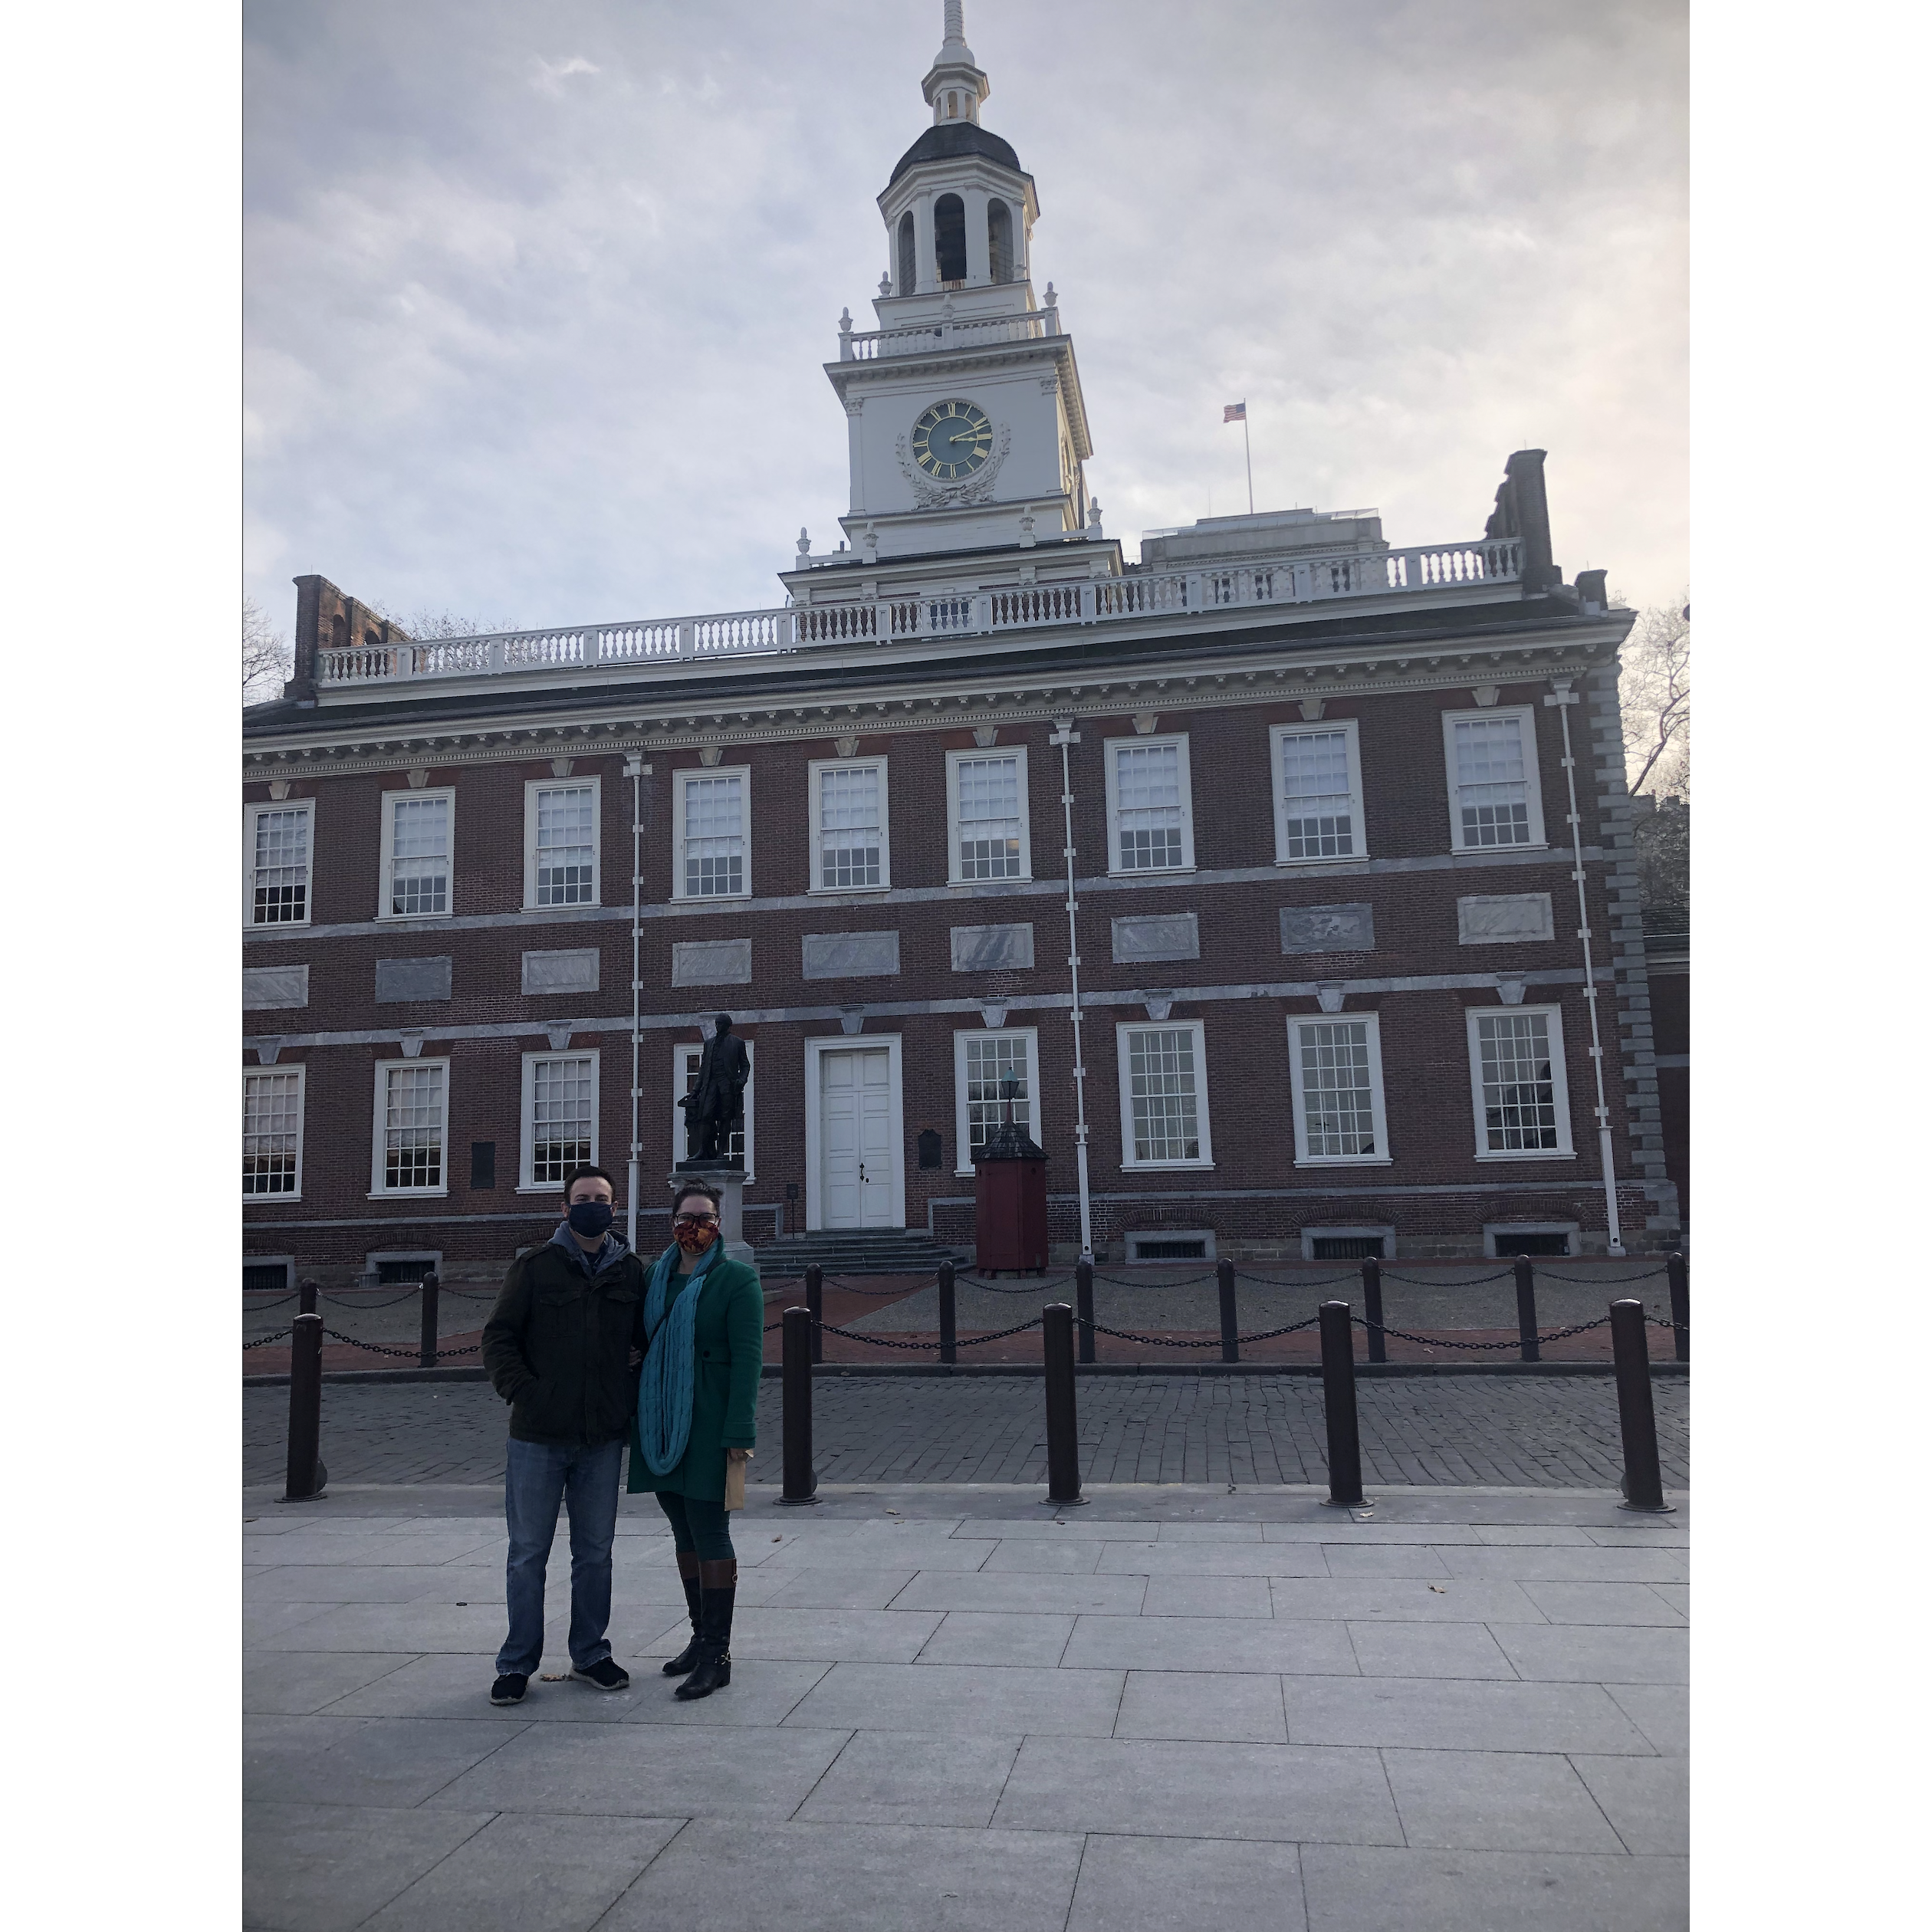 In front of Independence Hall, Philadelphia